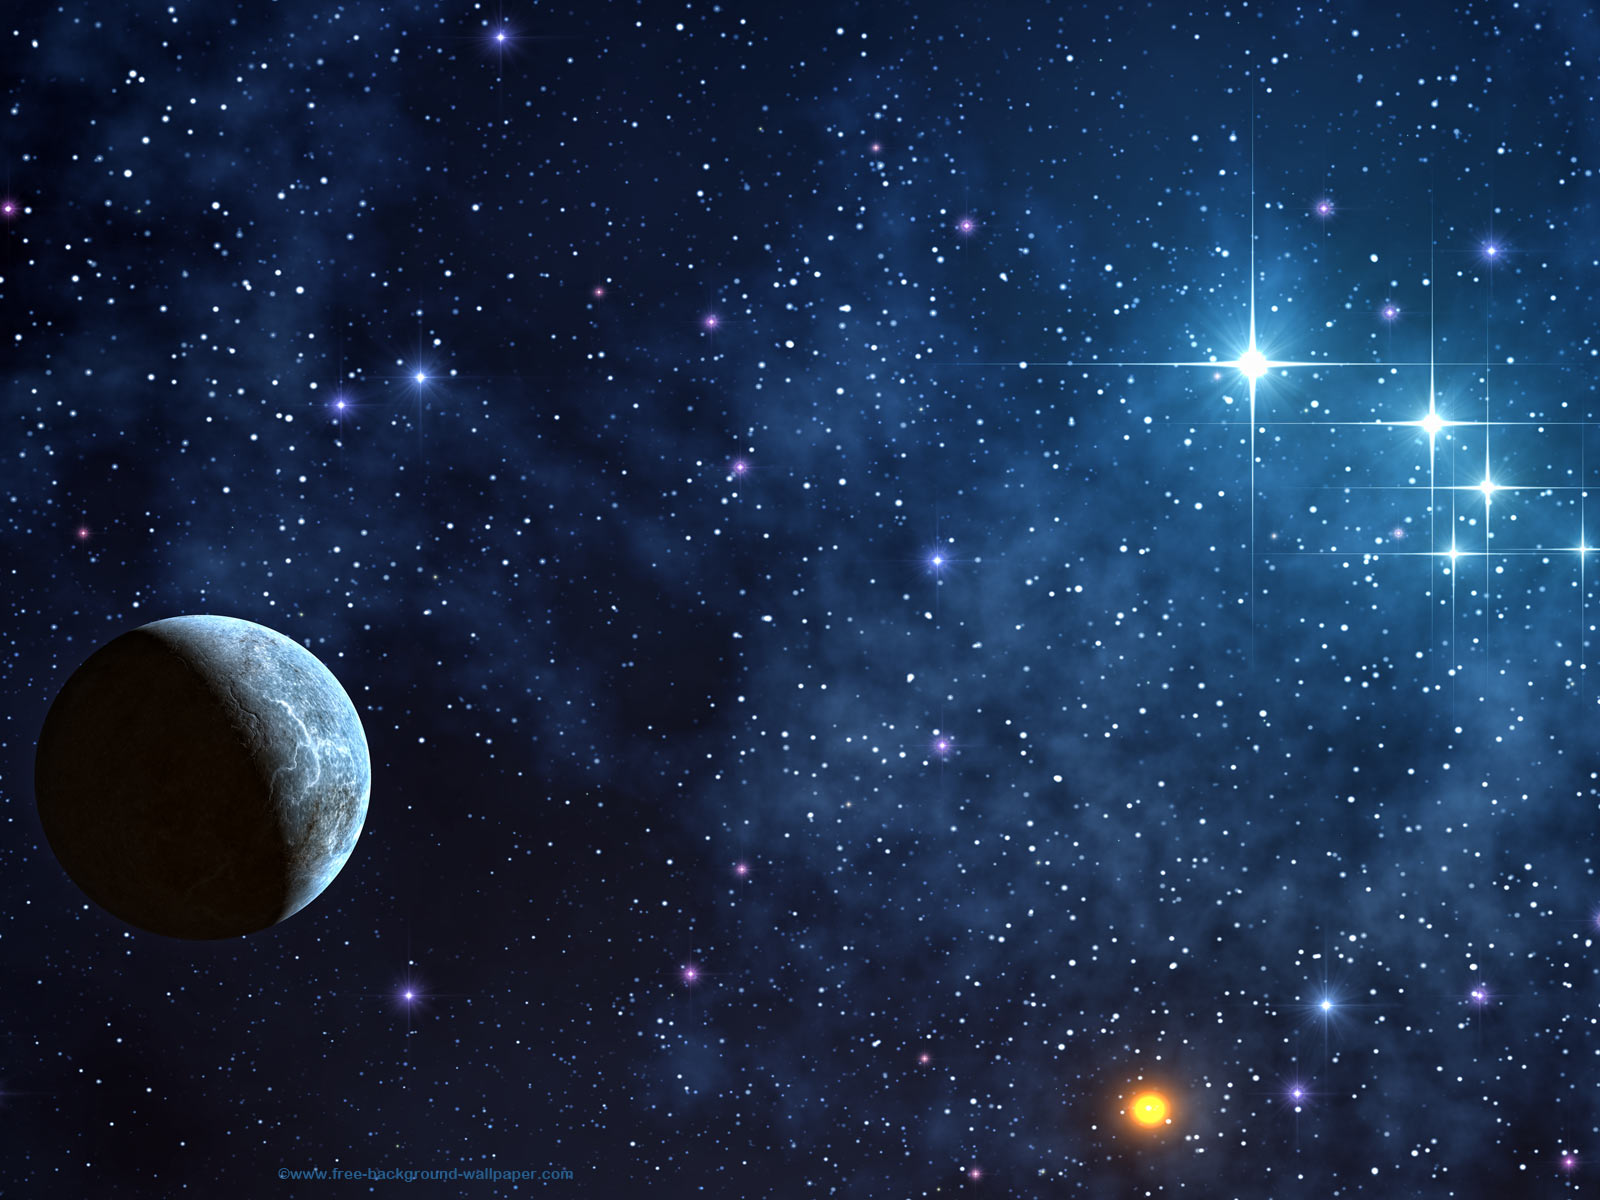 Space Stars Background 3343 Hd Wallpapers in Space   Imagescicom 1600x1200